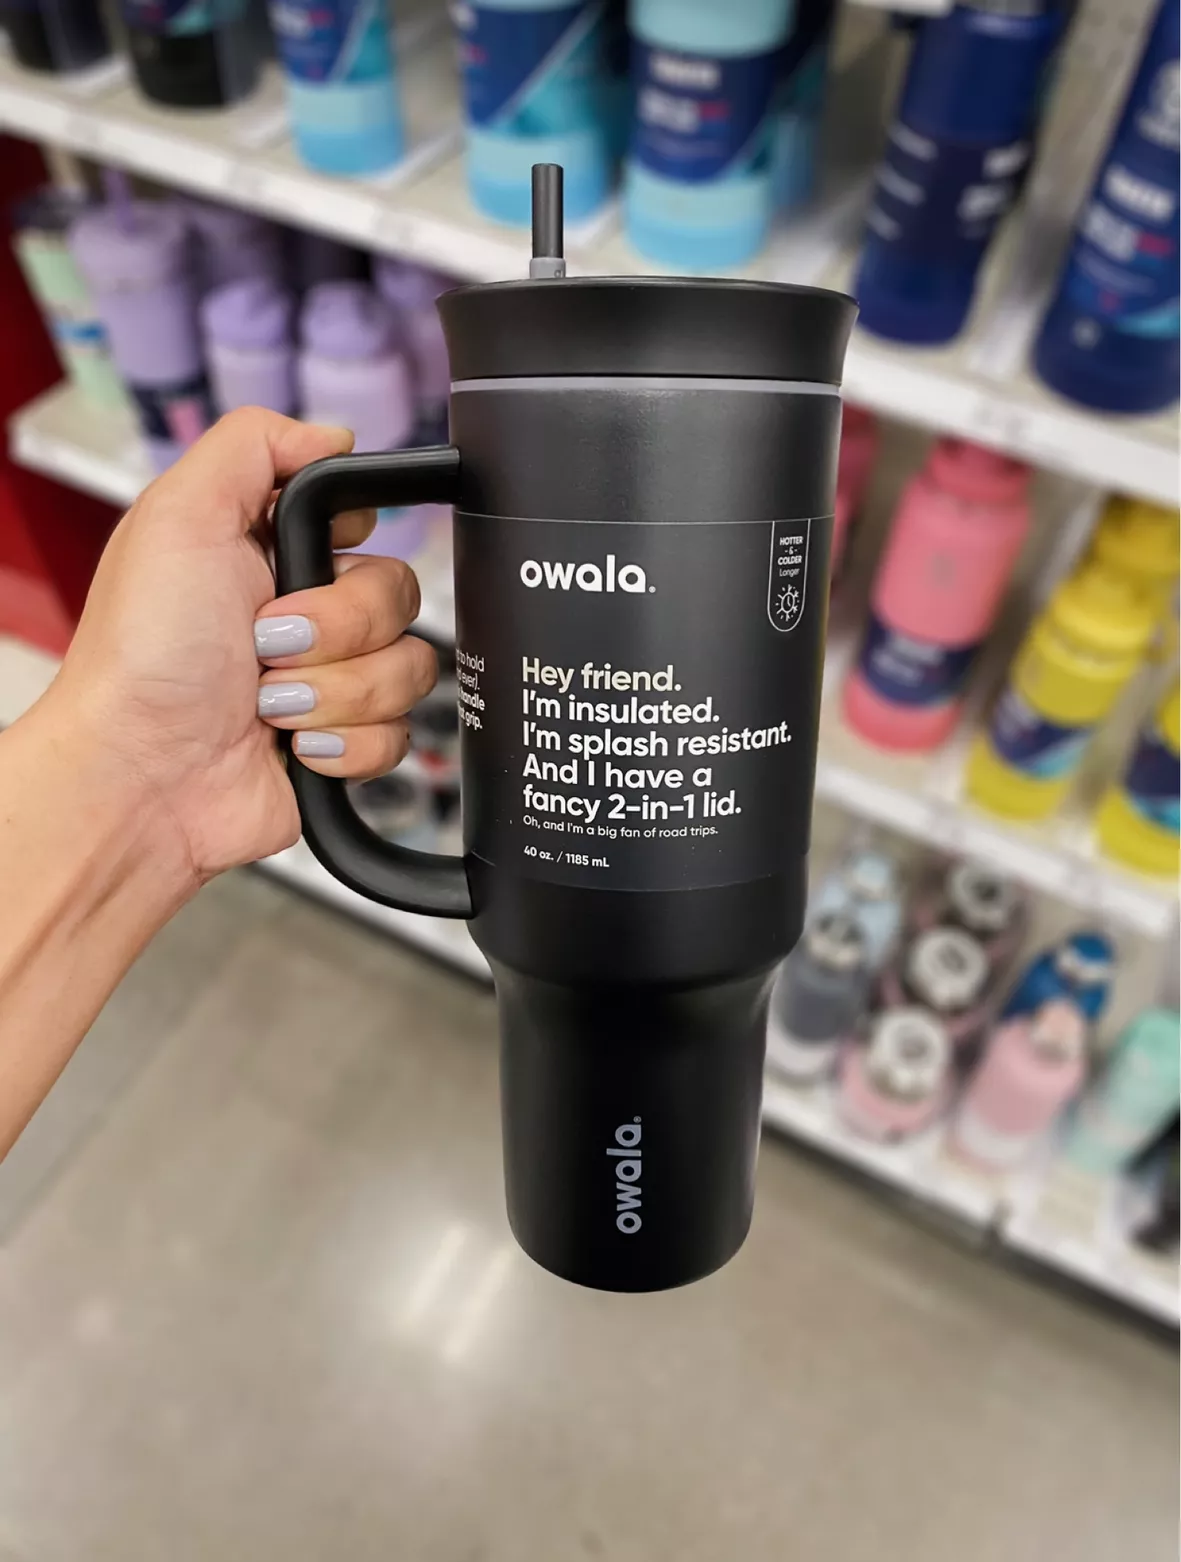 Finally found the limited edition Owala water bottle at Whole